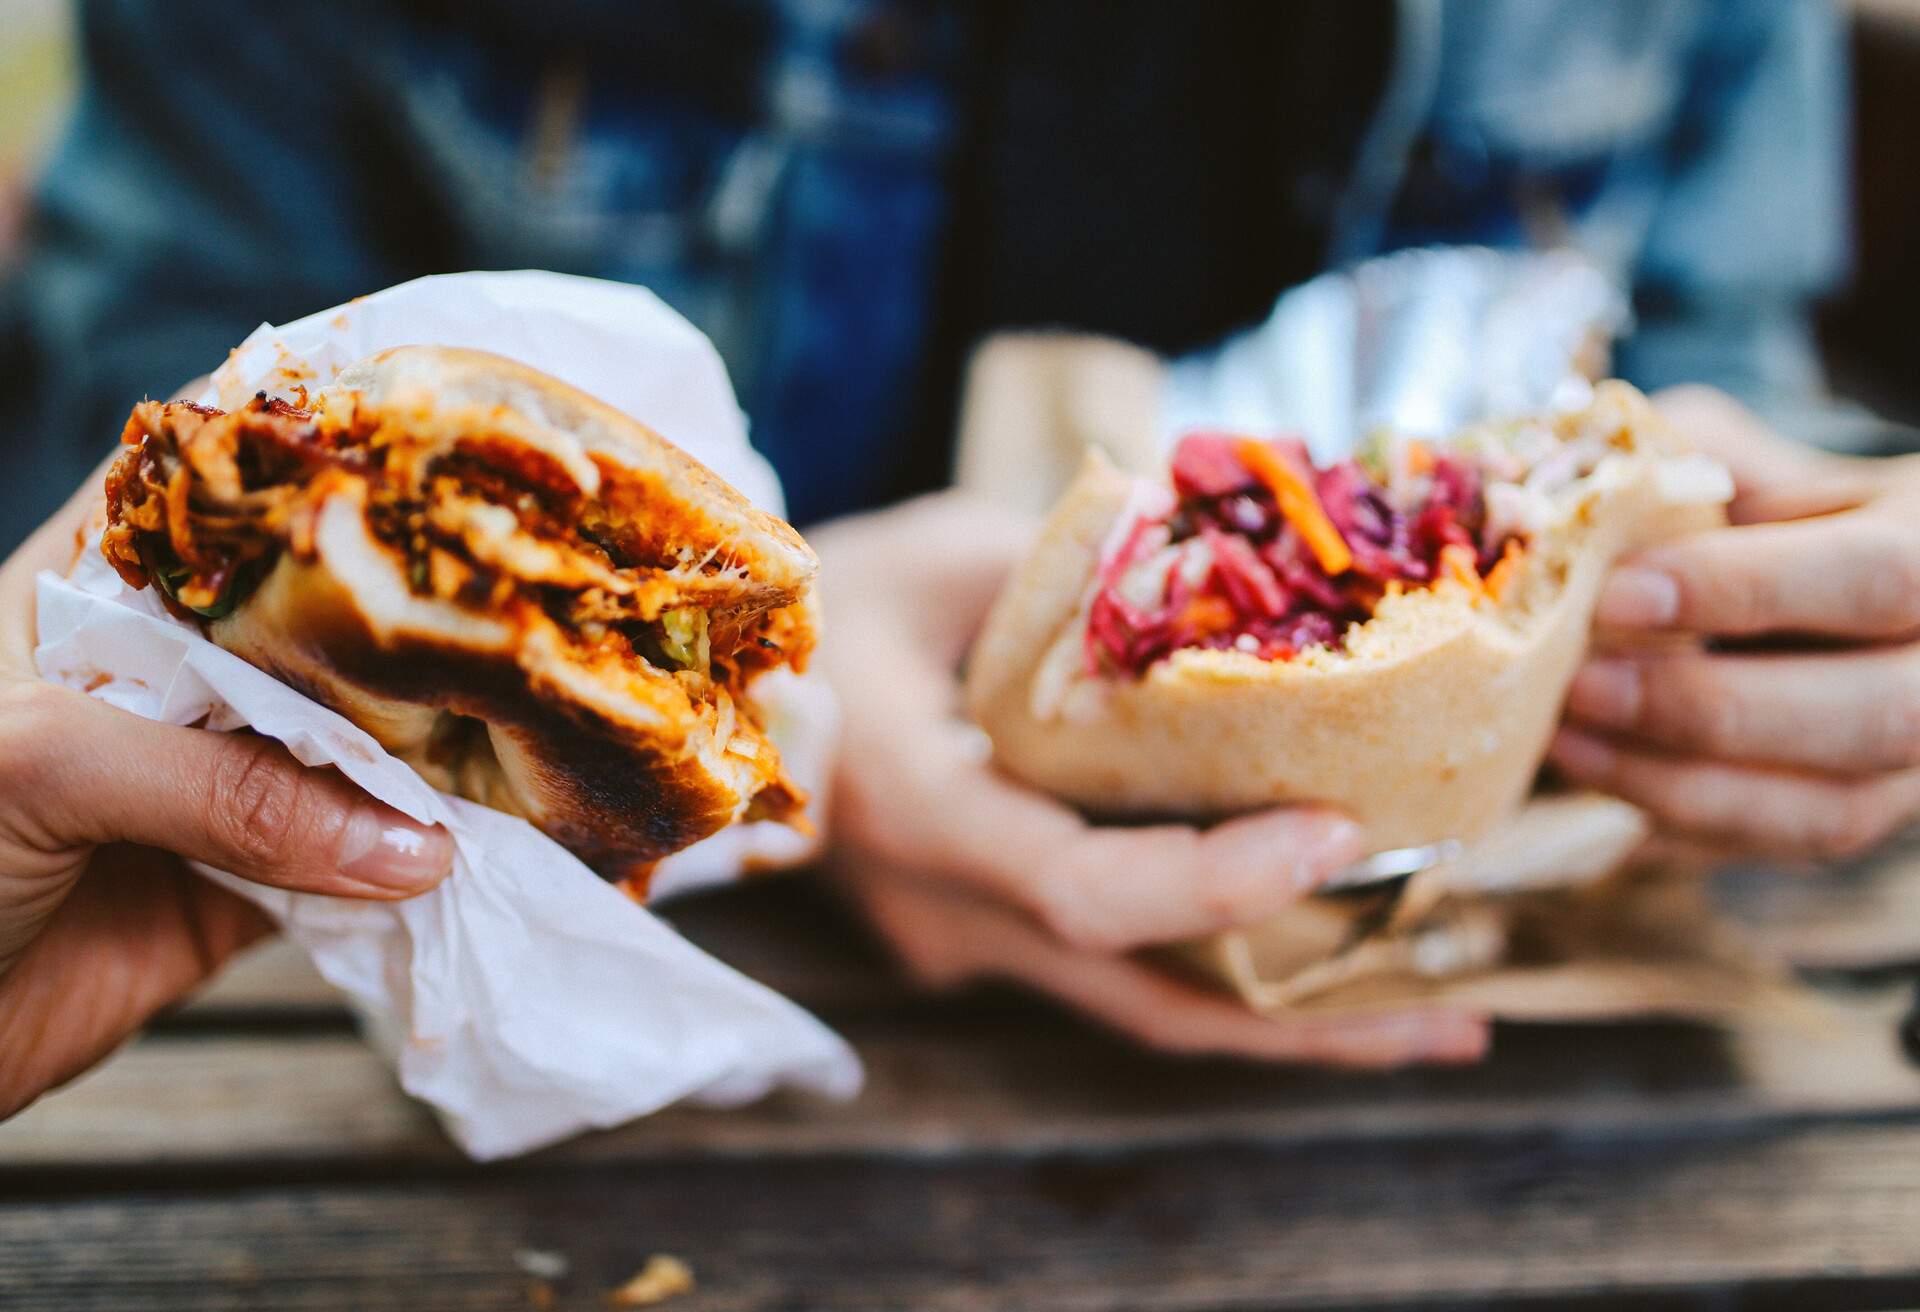 Close up image of two people eating a Texas style pulled pork barbeque and a falafel fast food in East London.